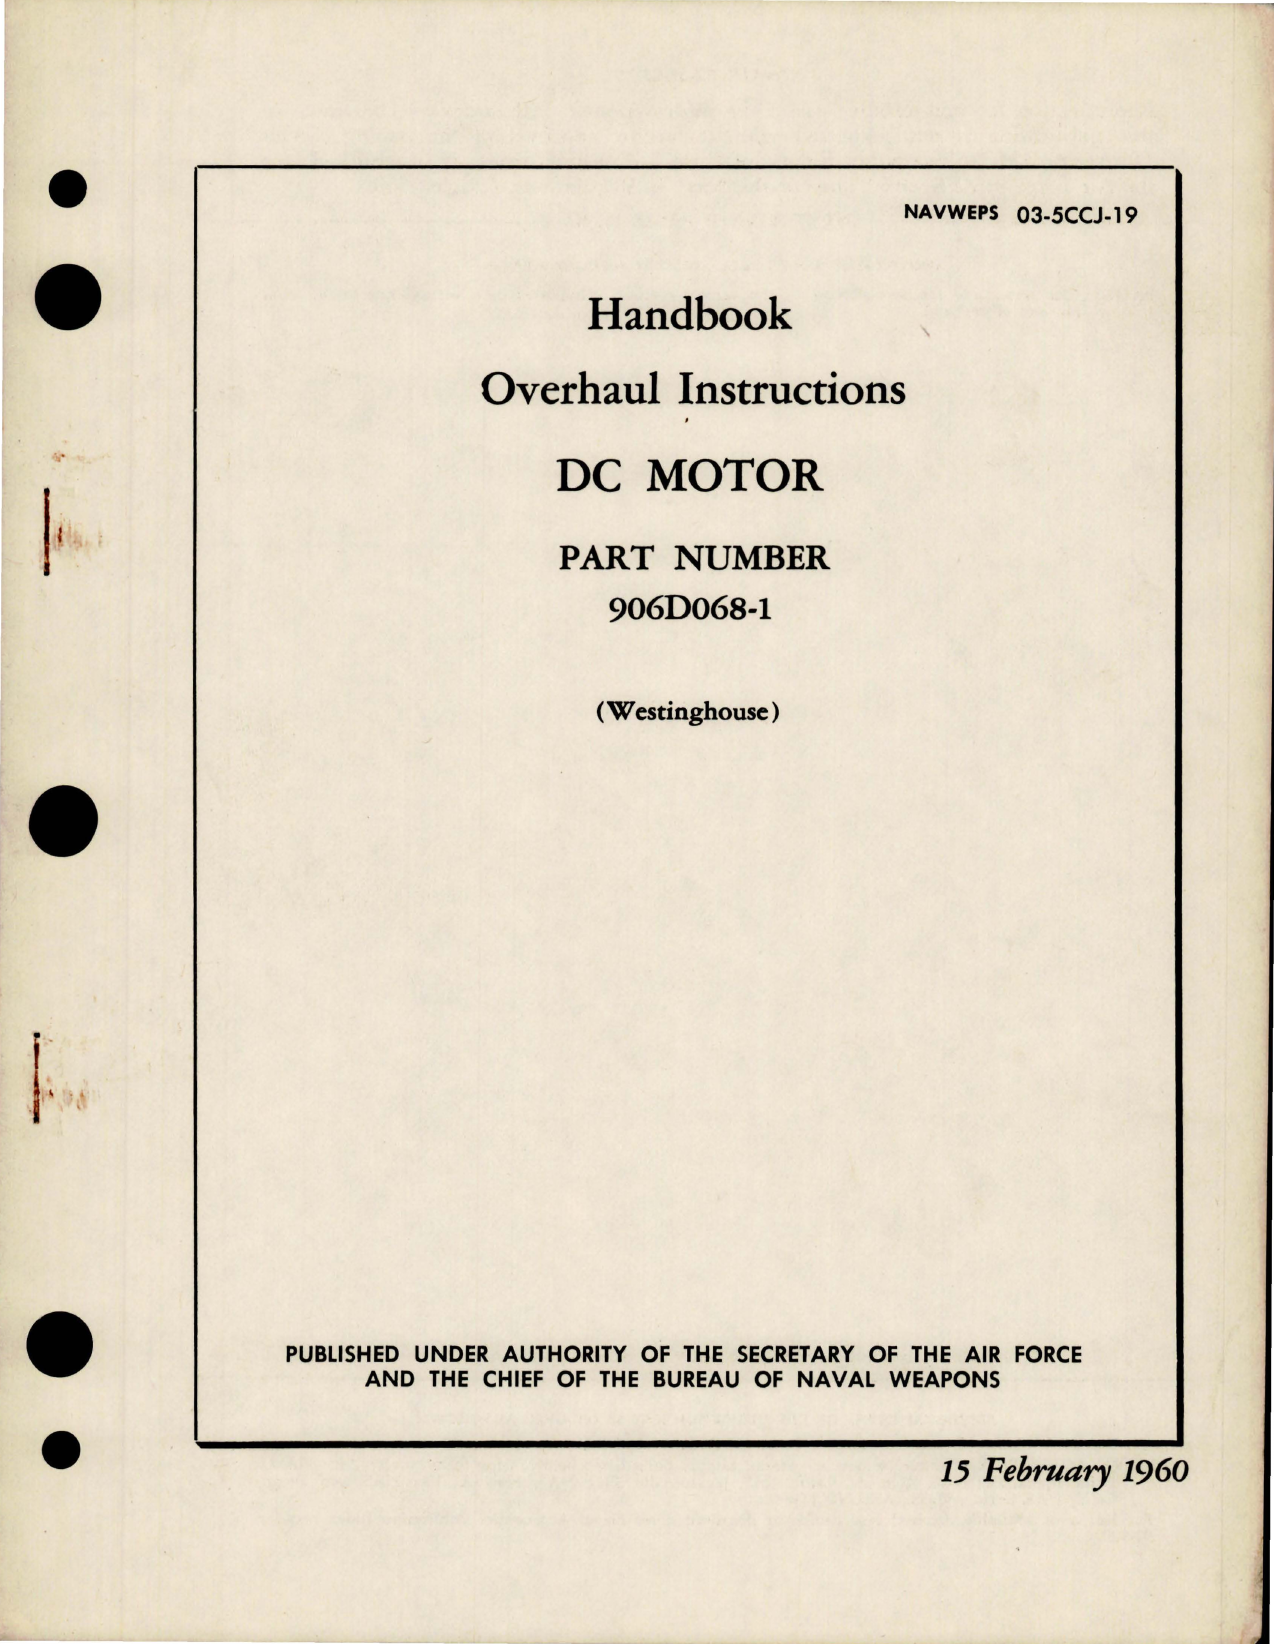 Sample page 1 from AirCorps Library document: Overhaul Instructions for DC Motor - Part 906D068-1 